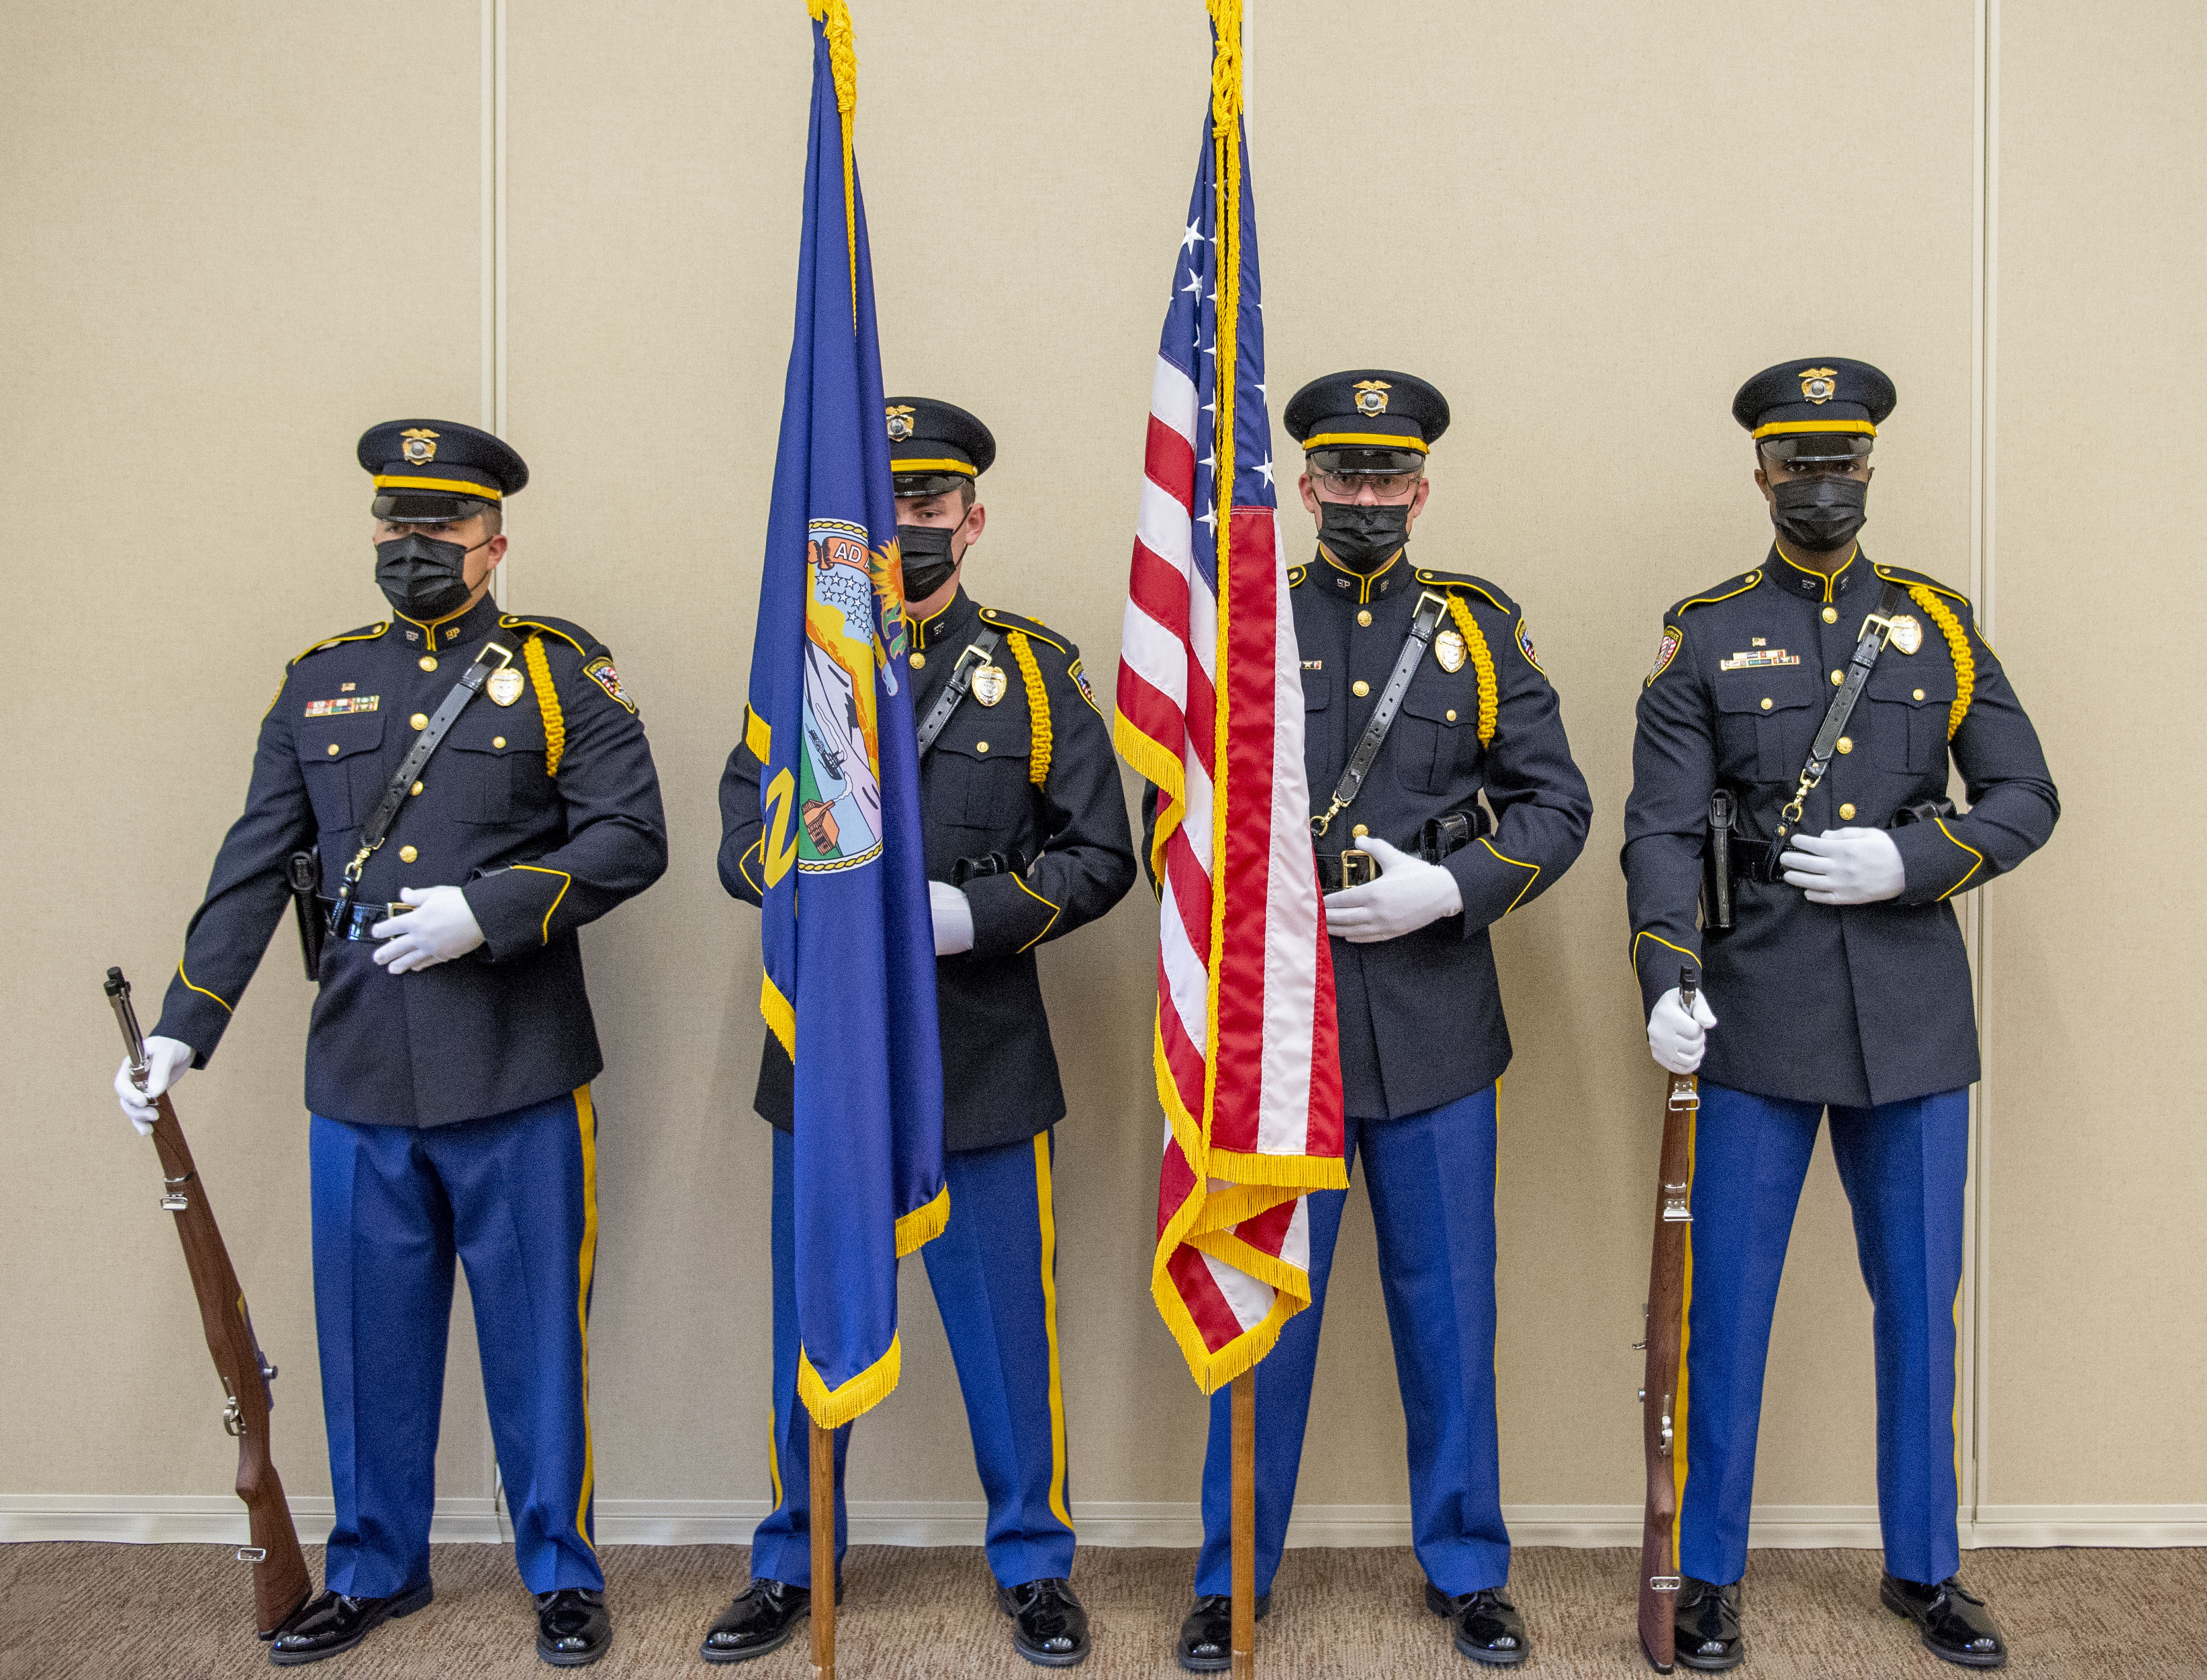 The Hutchinson Police Department Honor Guard posted the colors